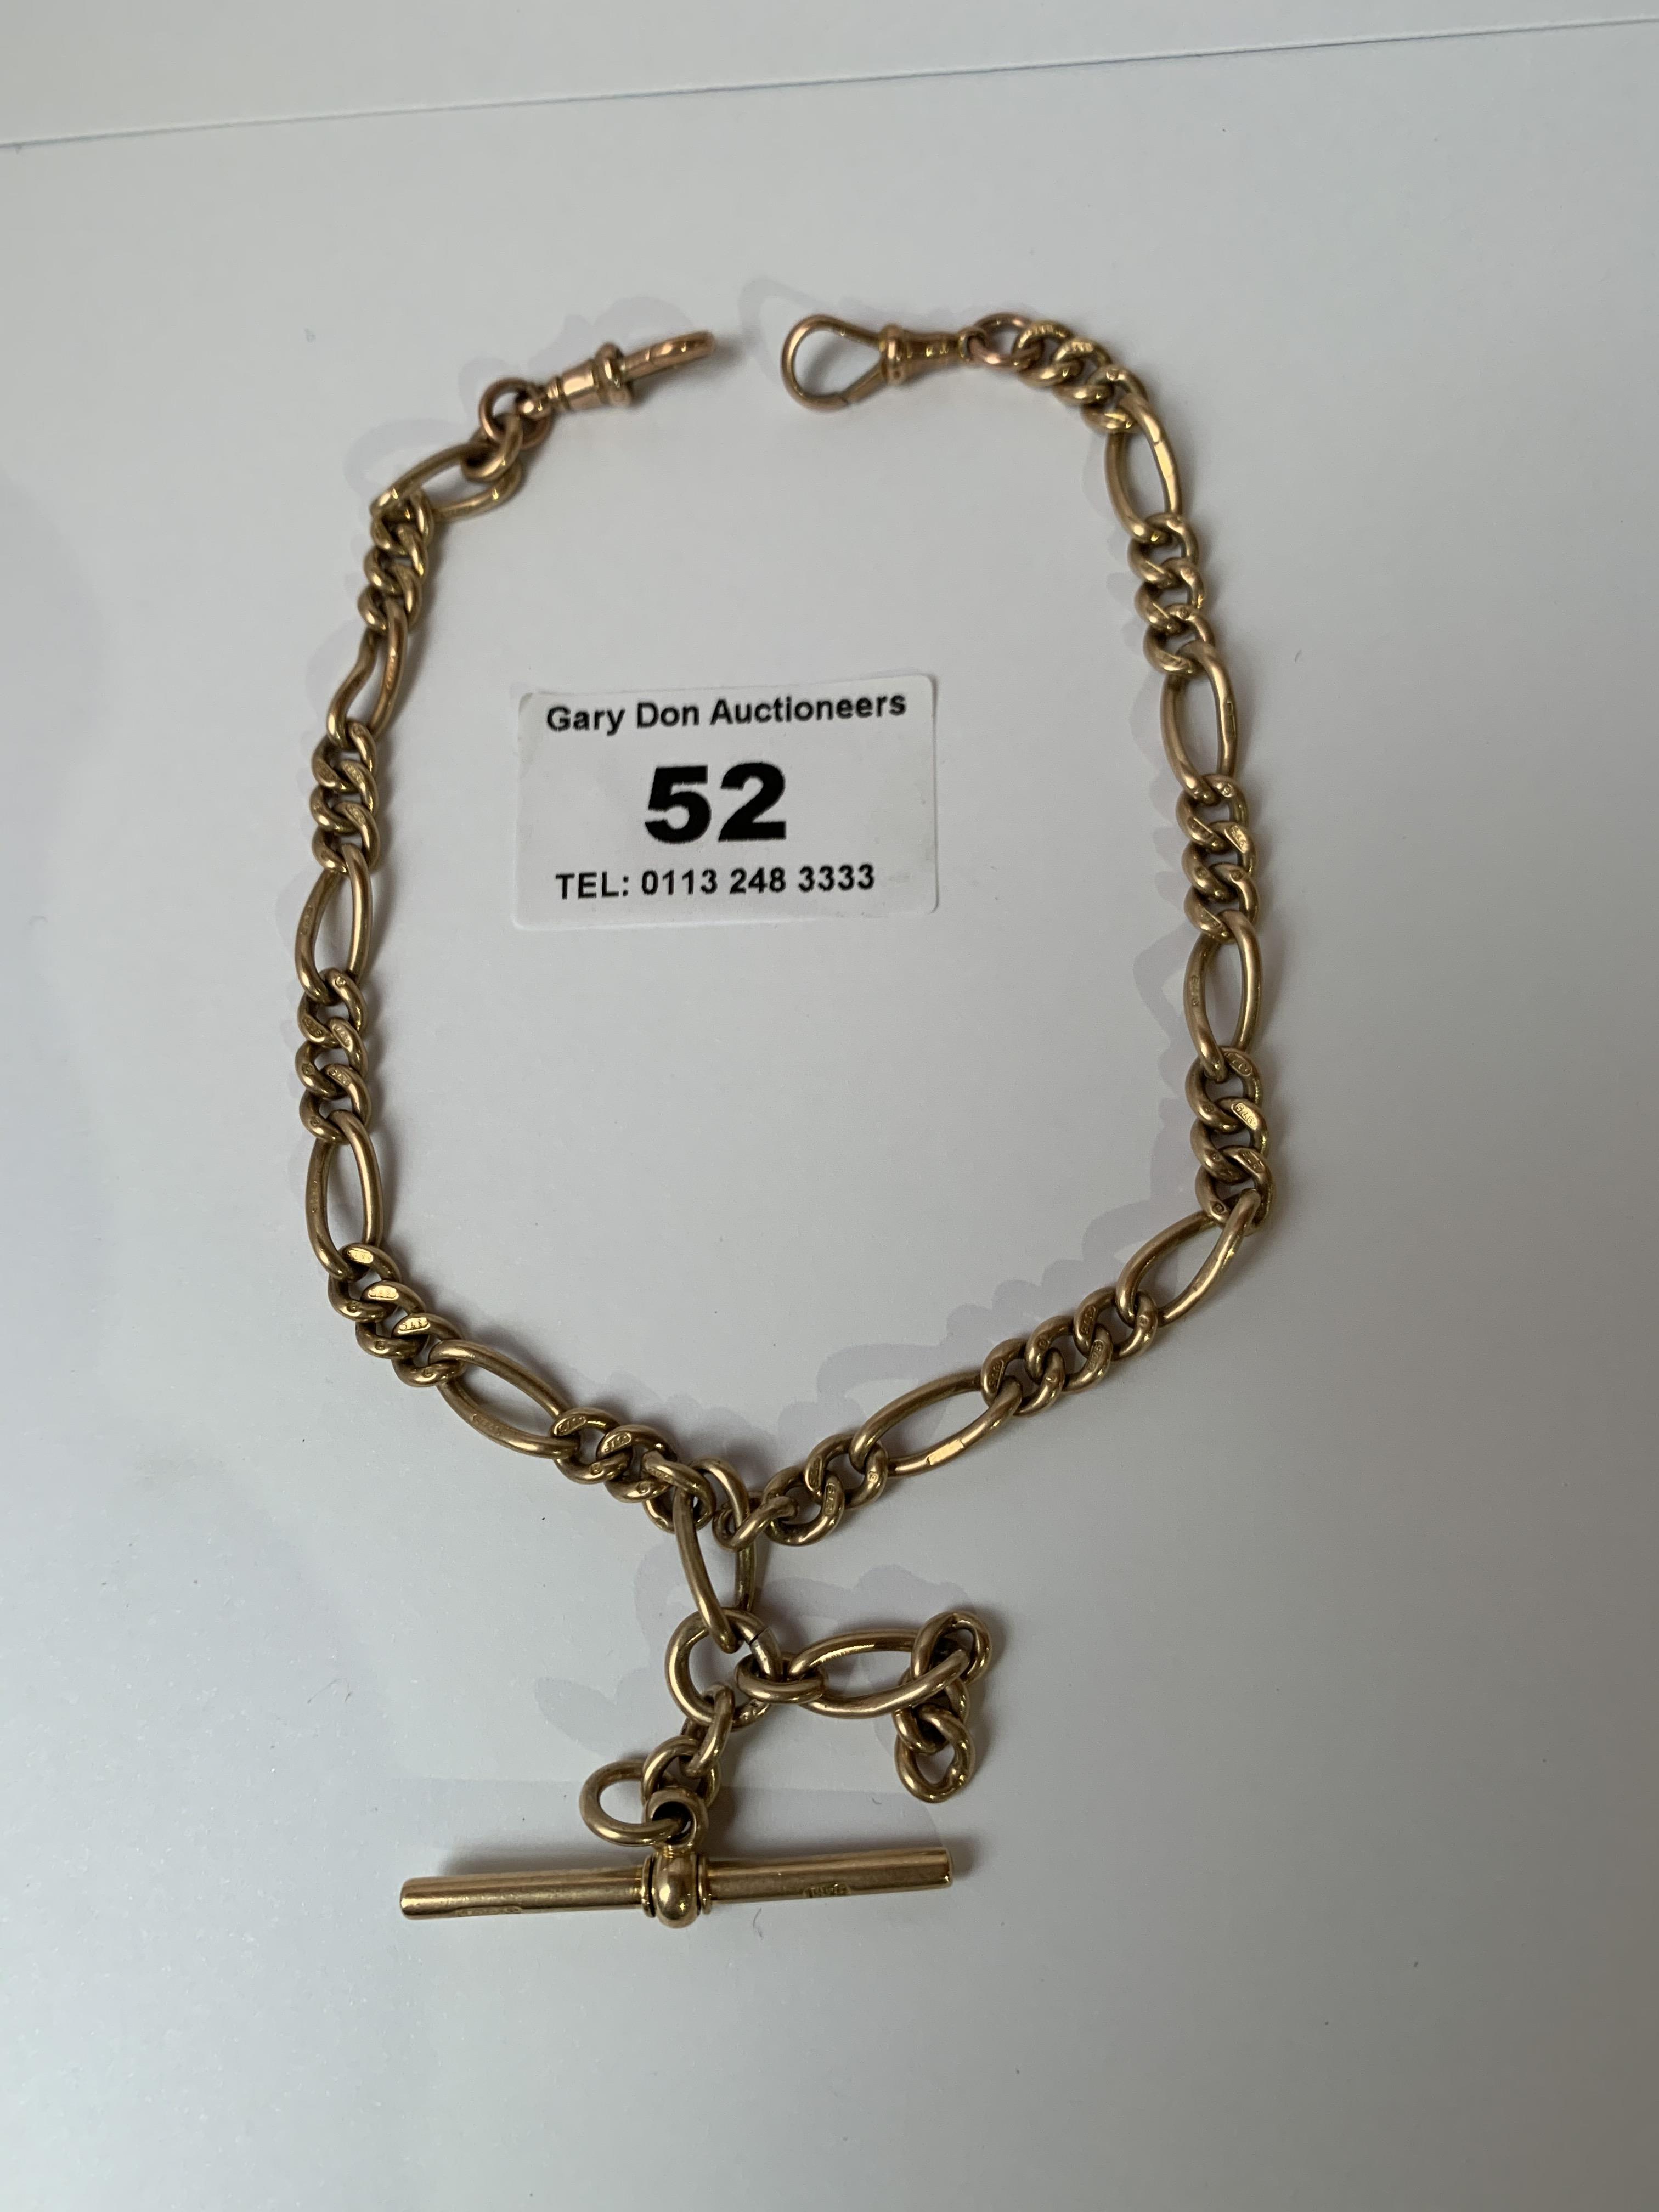 9k gold watch chain with t-bar, w: 25.89 grams, length 11”